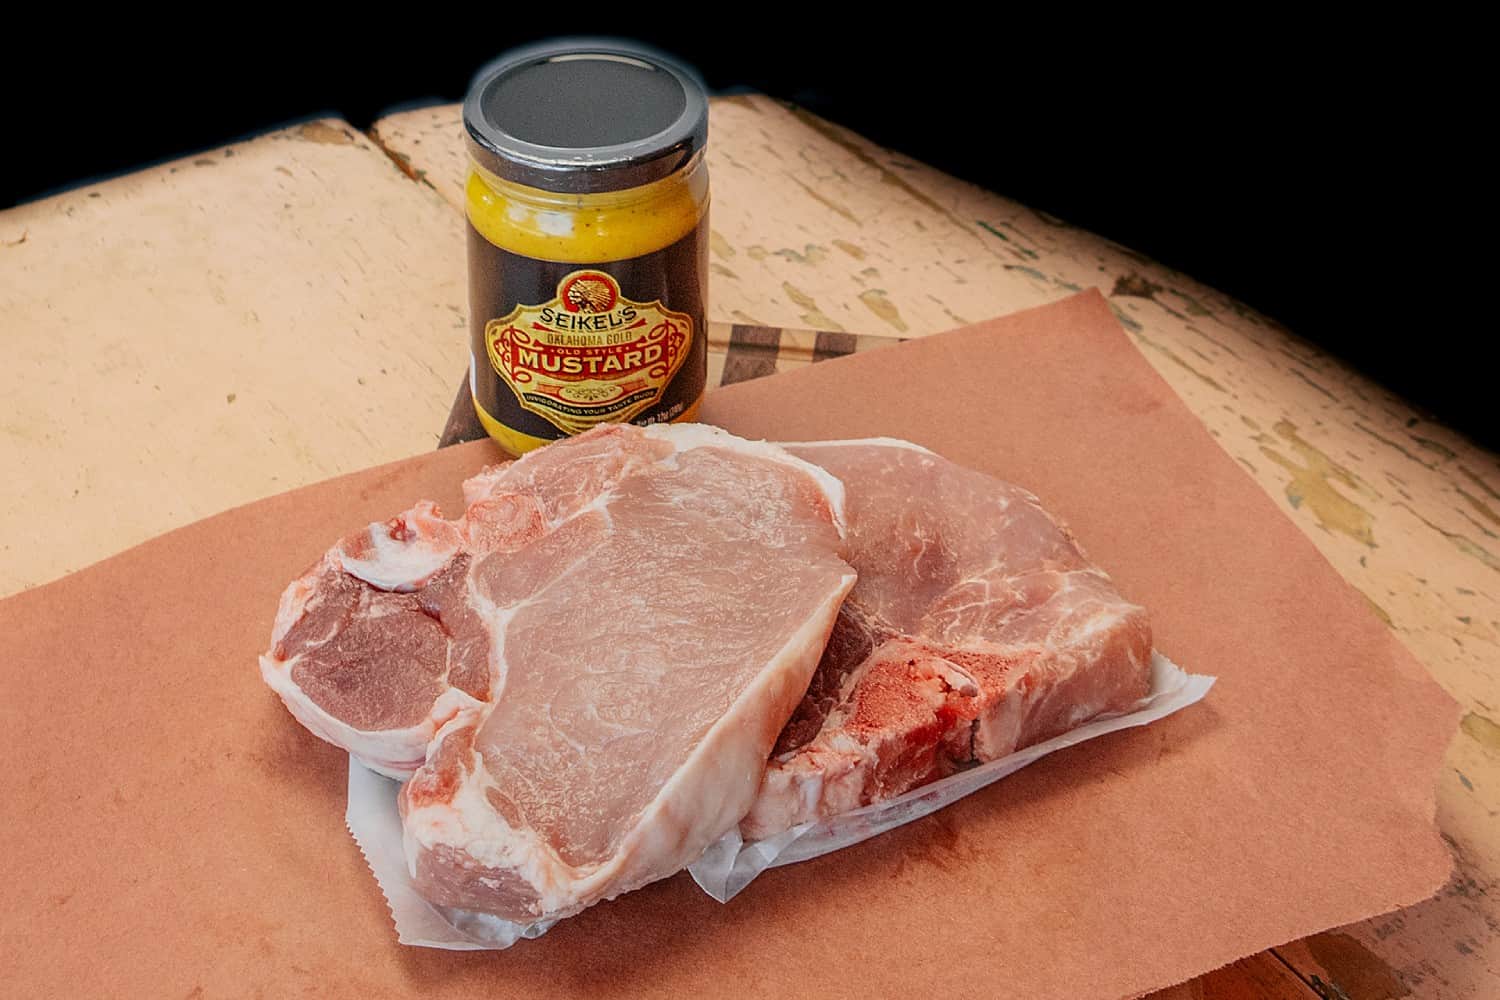 Pork chops, ready to cook, and Seikel's Mustard jar